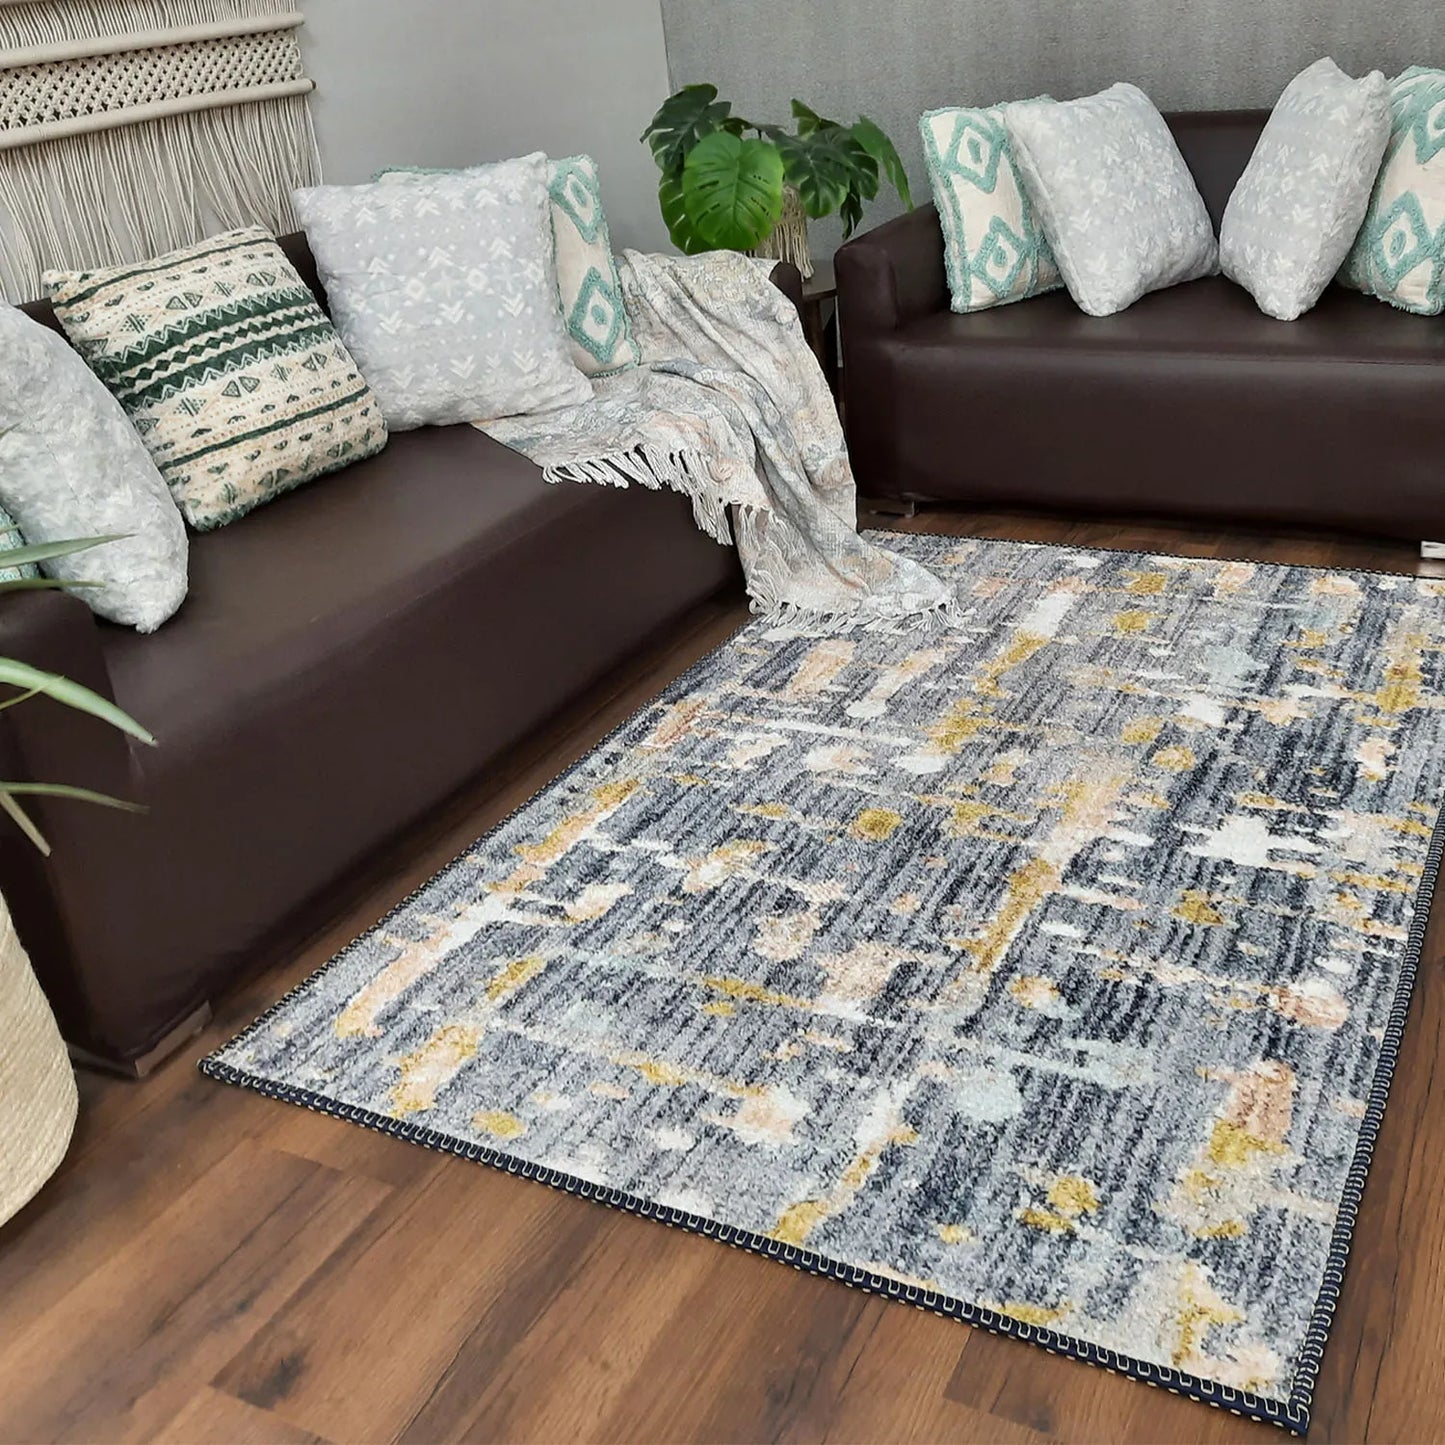 Avioni Home Faux Silk Carpet | Add a Touch of Glamour to Your Living Room | Durable and Washable | GreyDawn Collection